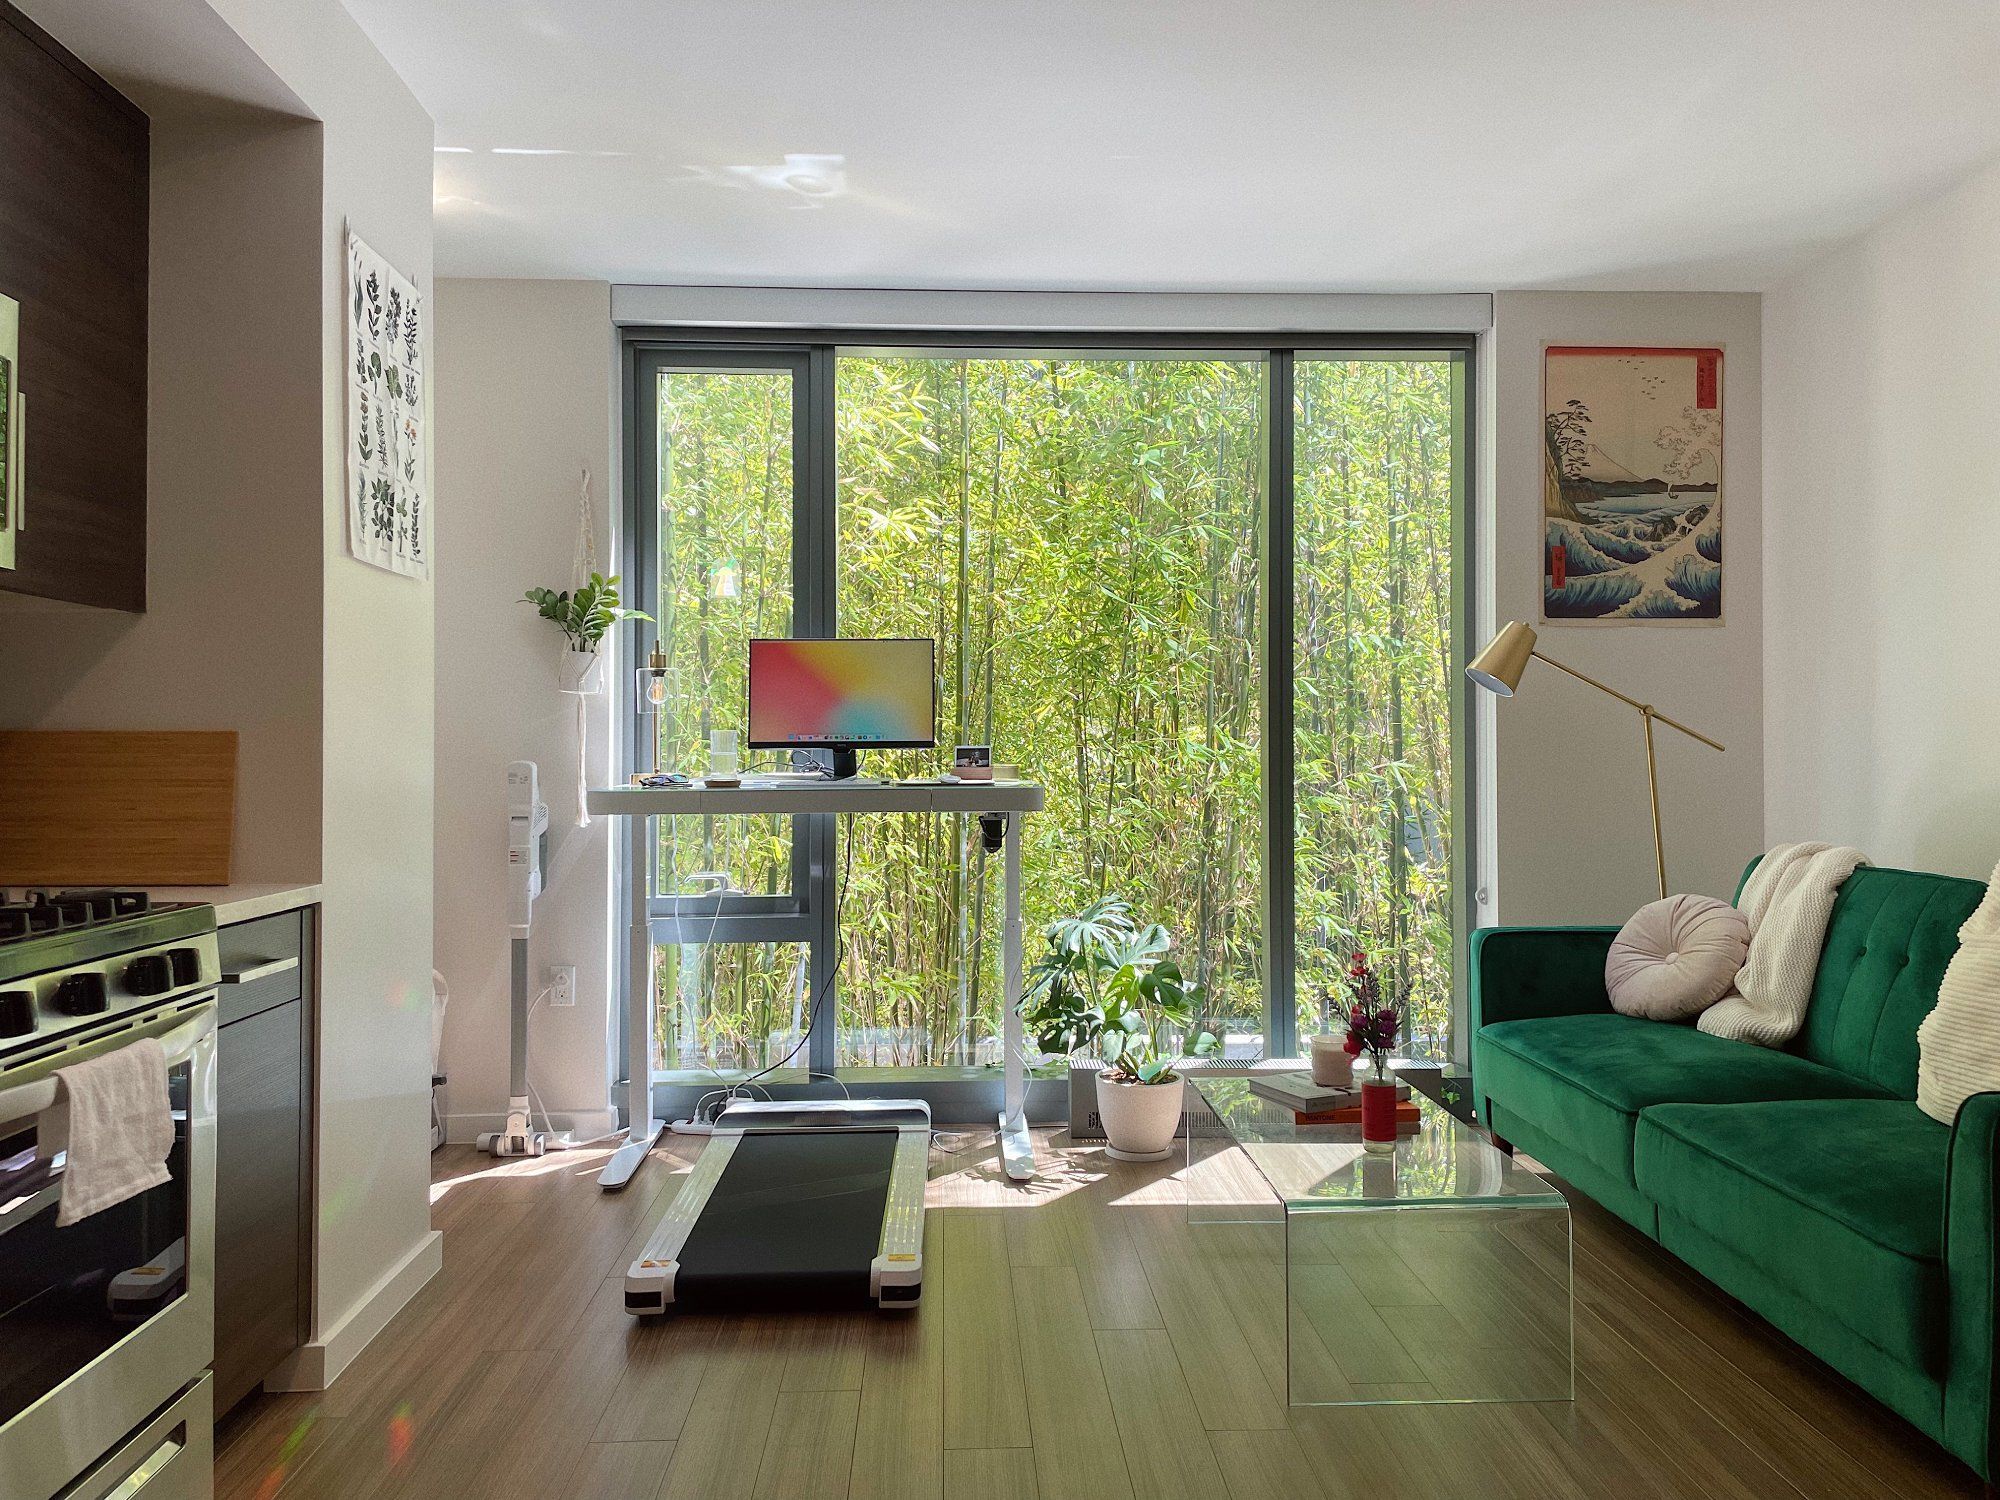 A home office with a standing desk and under-desk treadmill set against a window with a green view, complemented by a stylish office chair and vibrant green sofa